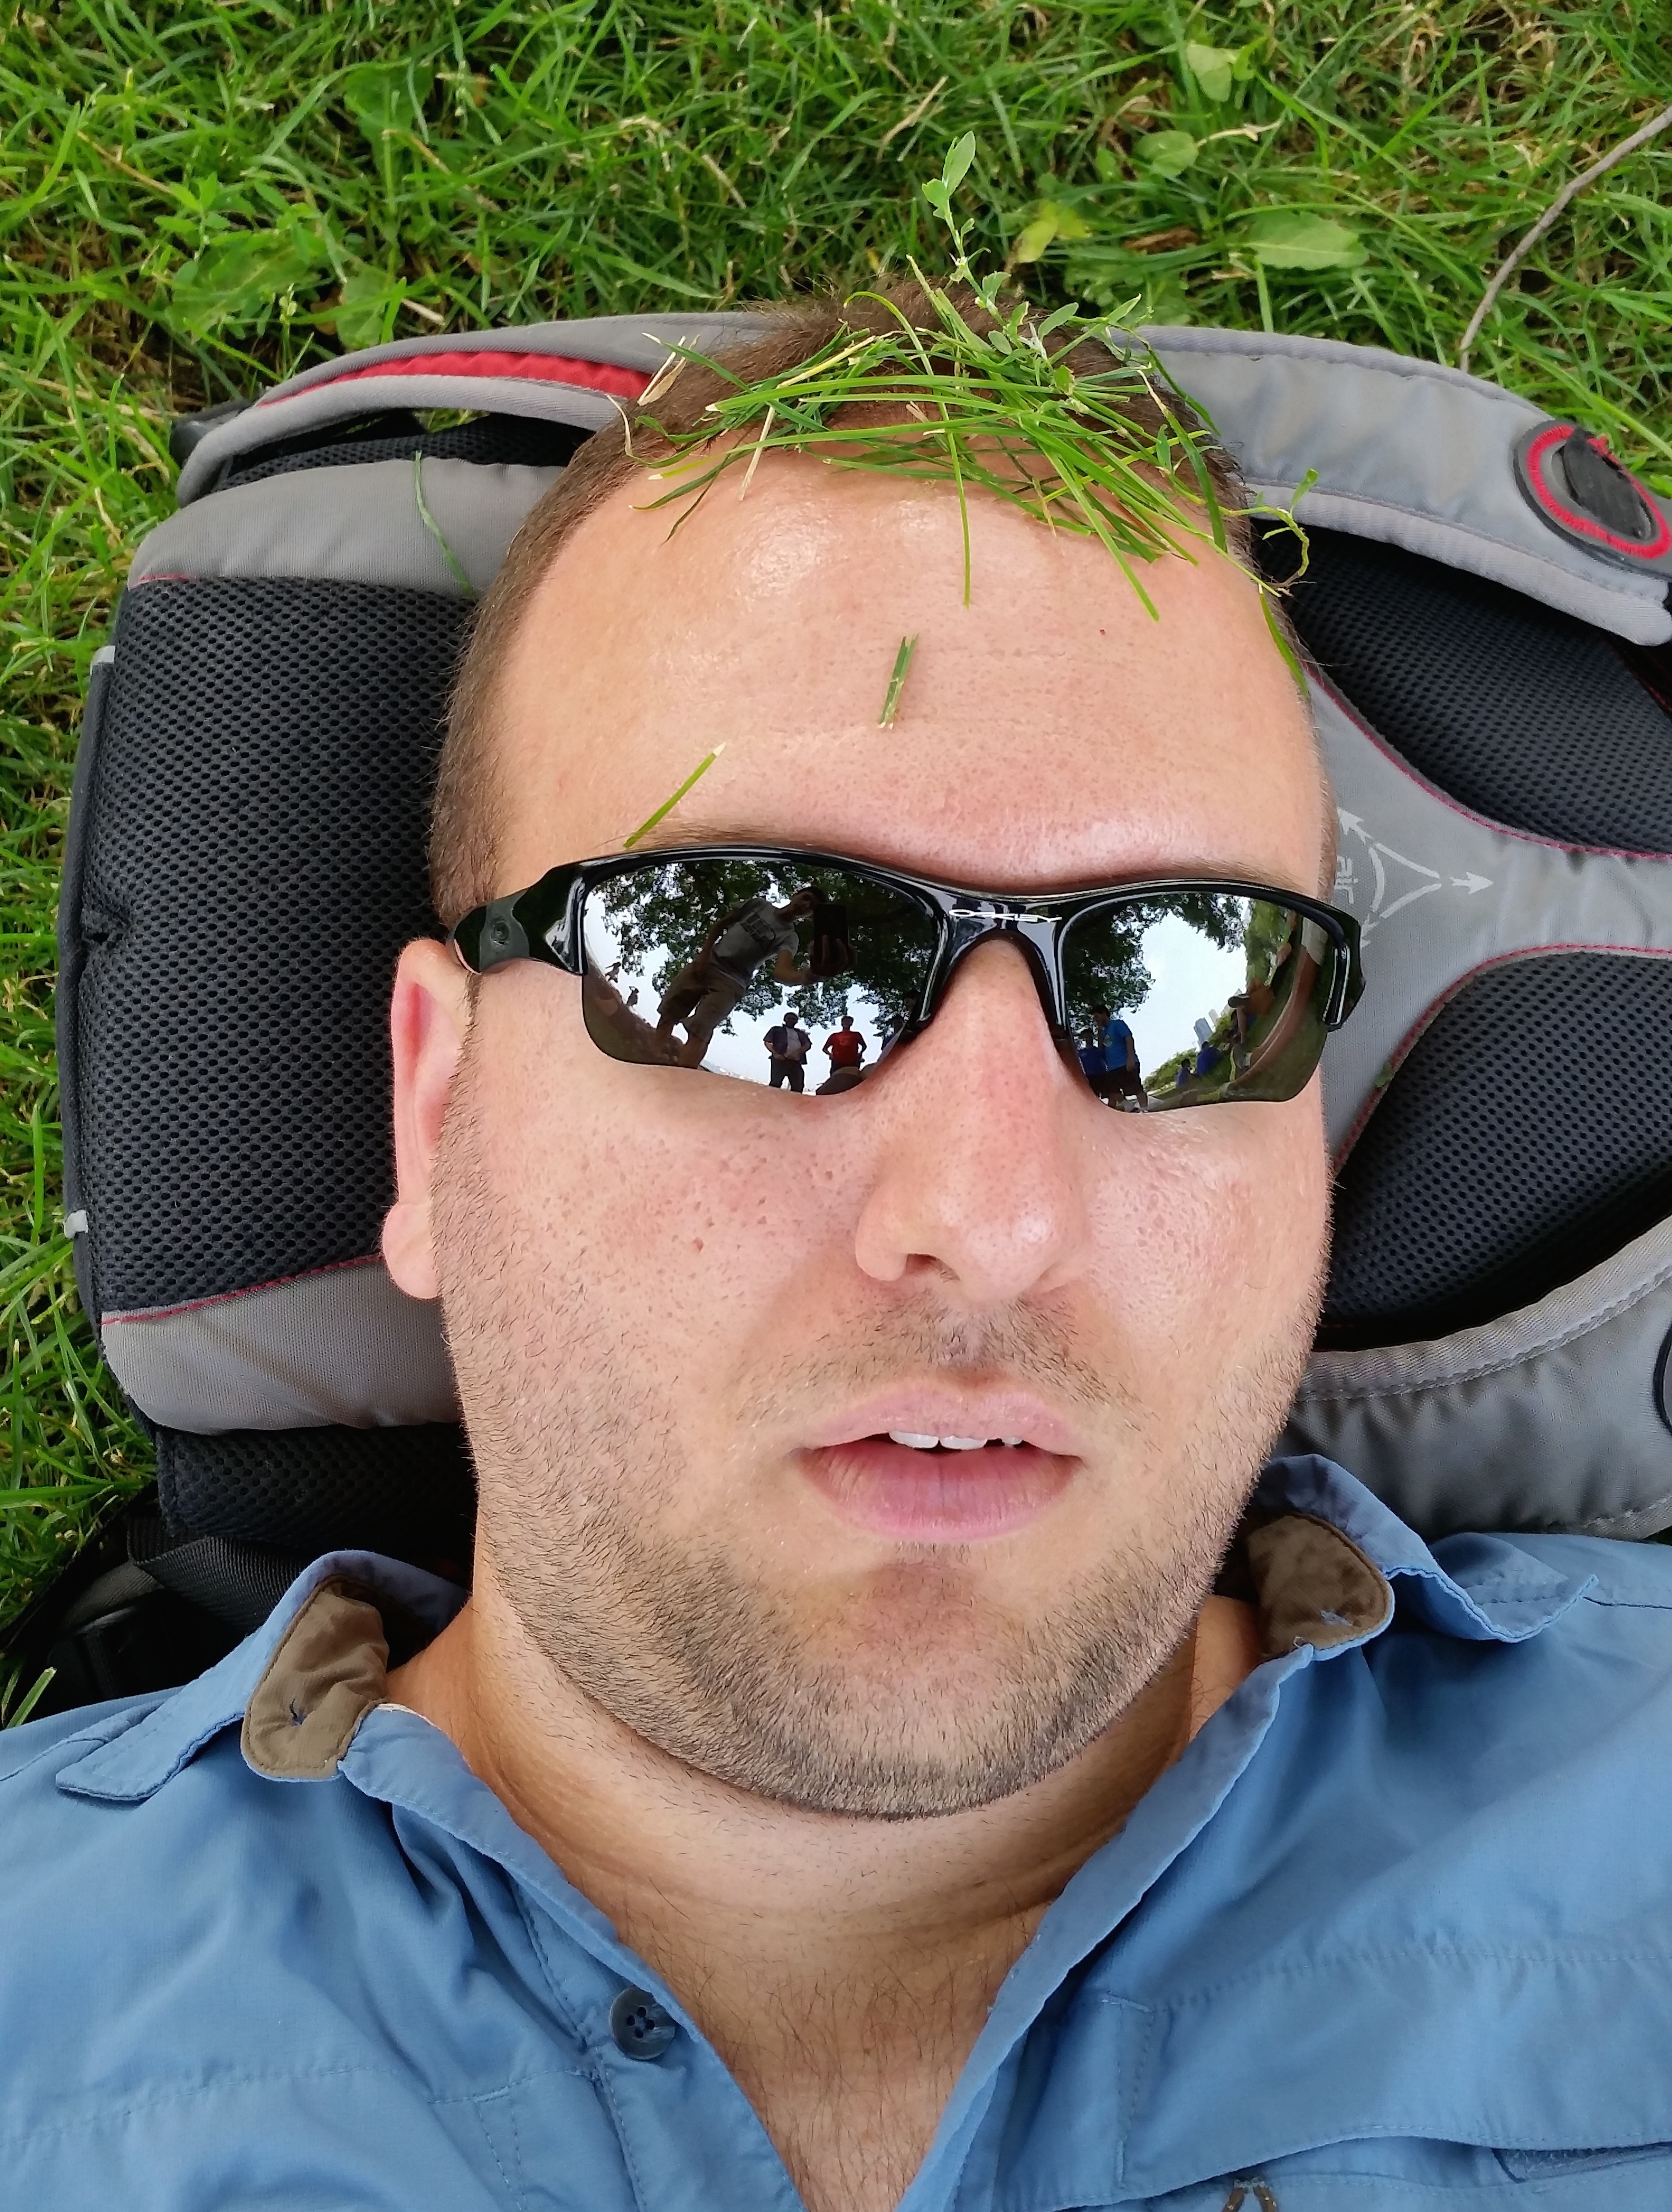 Cory needed a much needed nap in Chicago, but things got a bit grassy!